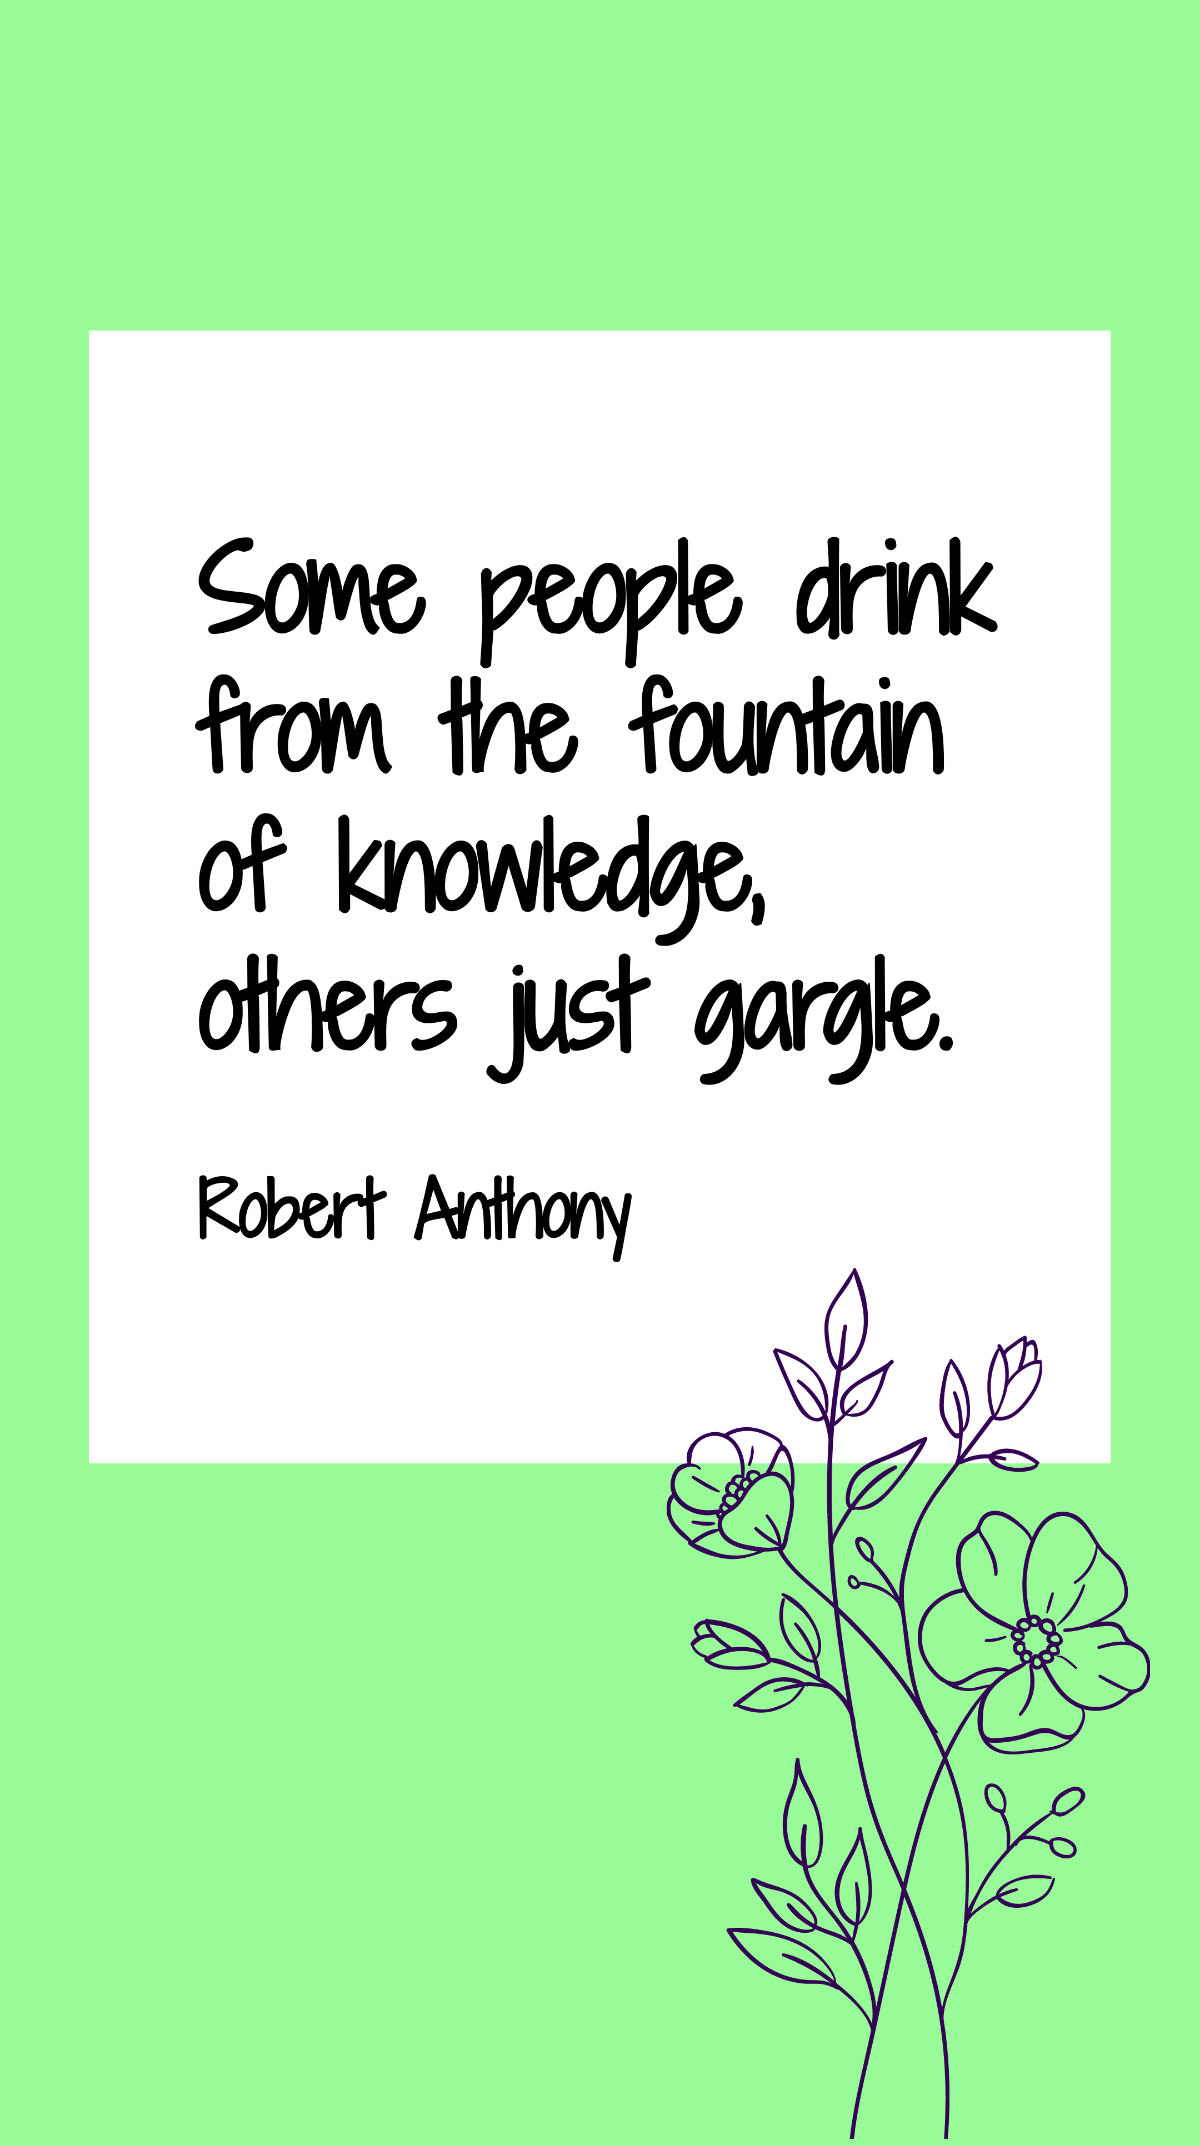 Robert Anthony - Some people drink from the fountain of knowledge, others just gargle.